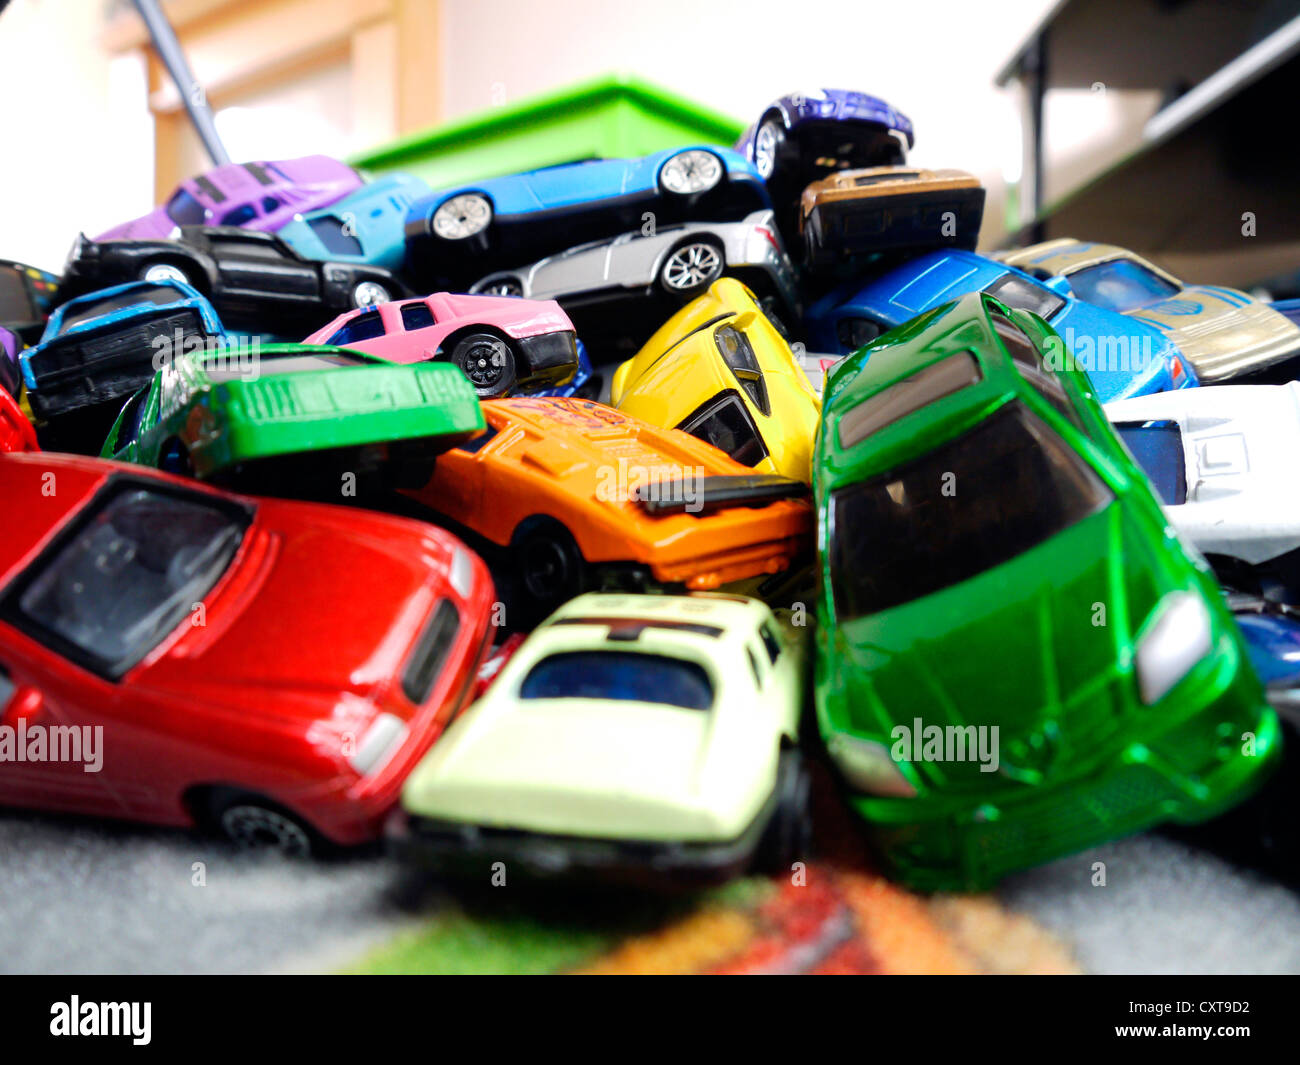 Toy Cars in a pile Stock Photo